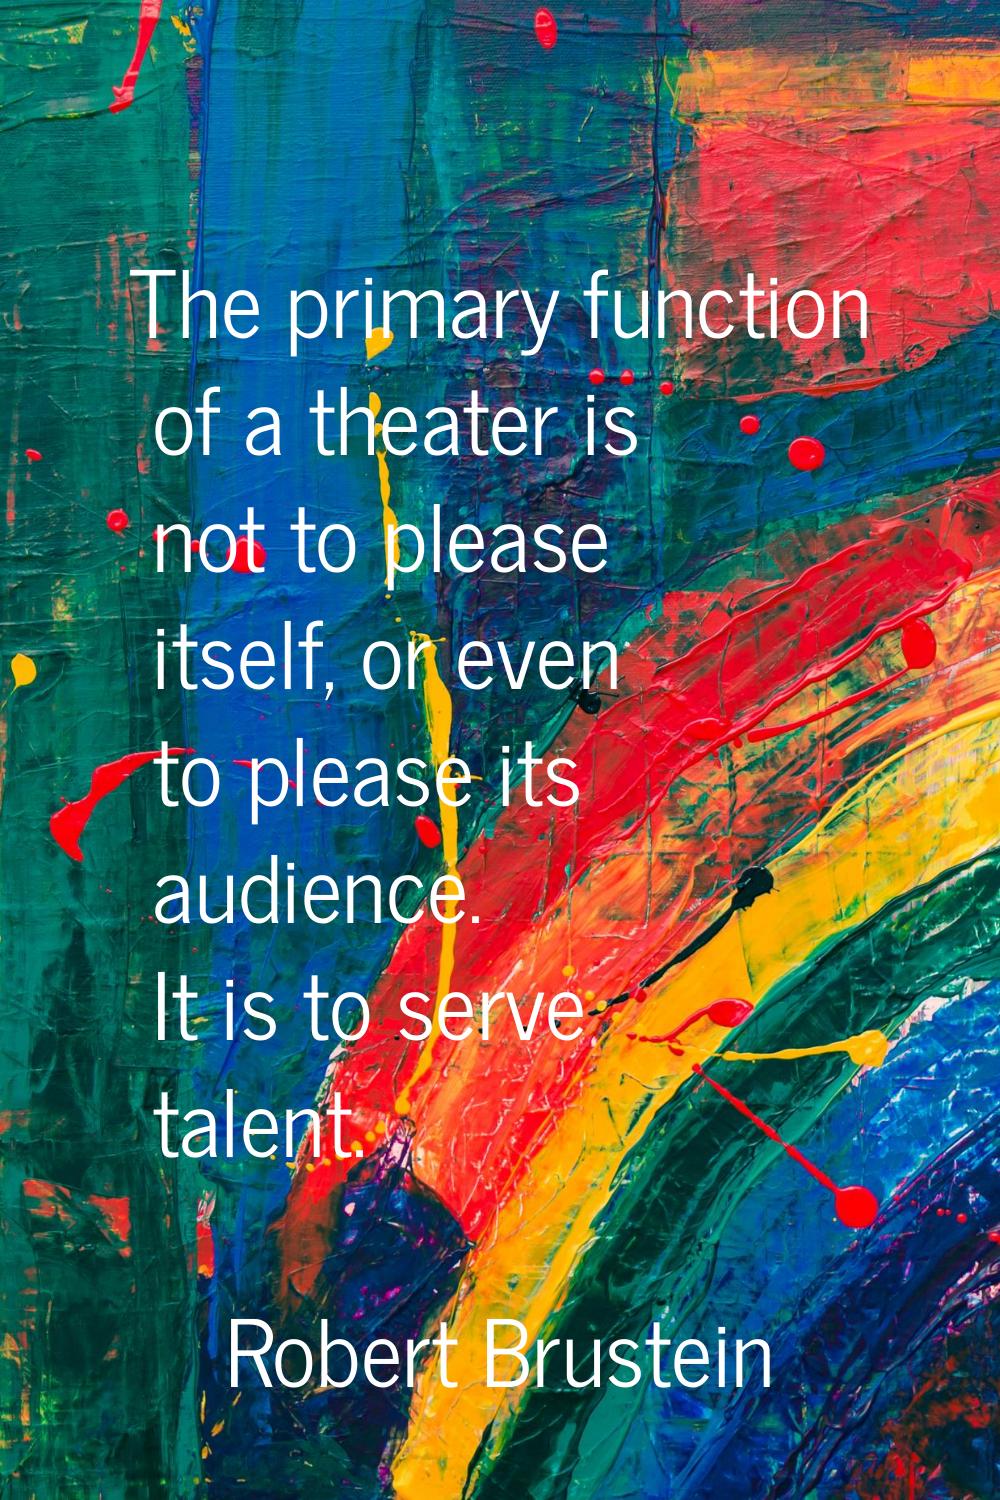 The primary function of a theater is not to please itself, or even to please its audience. It is to